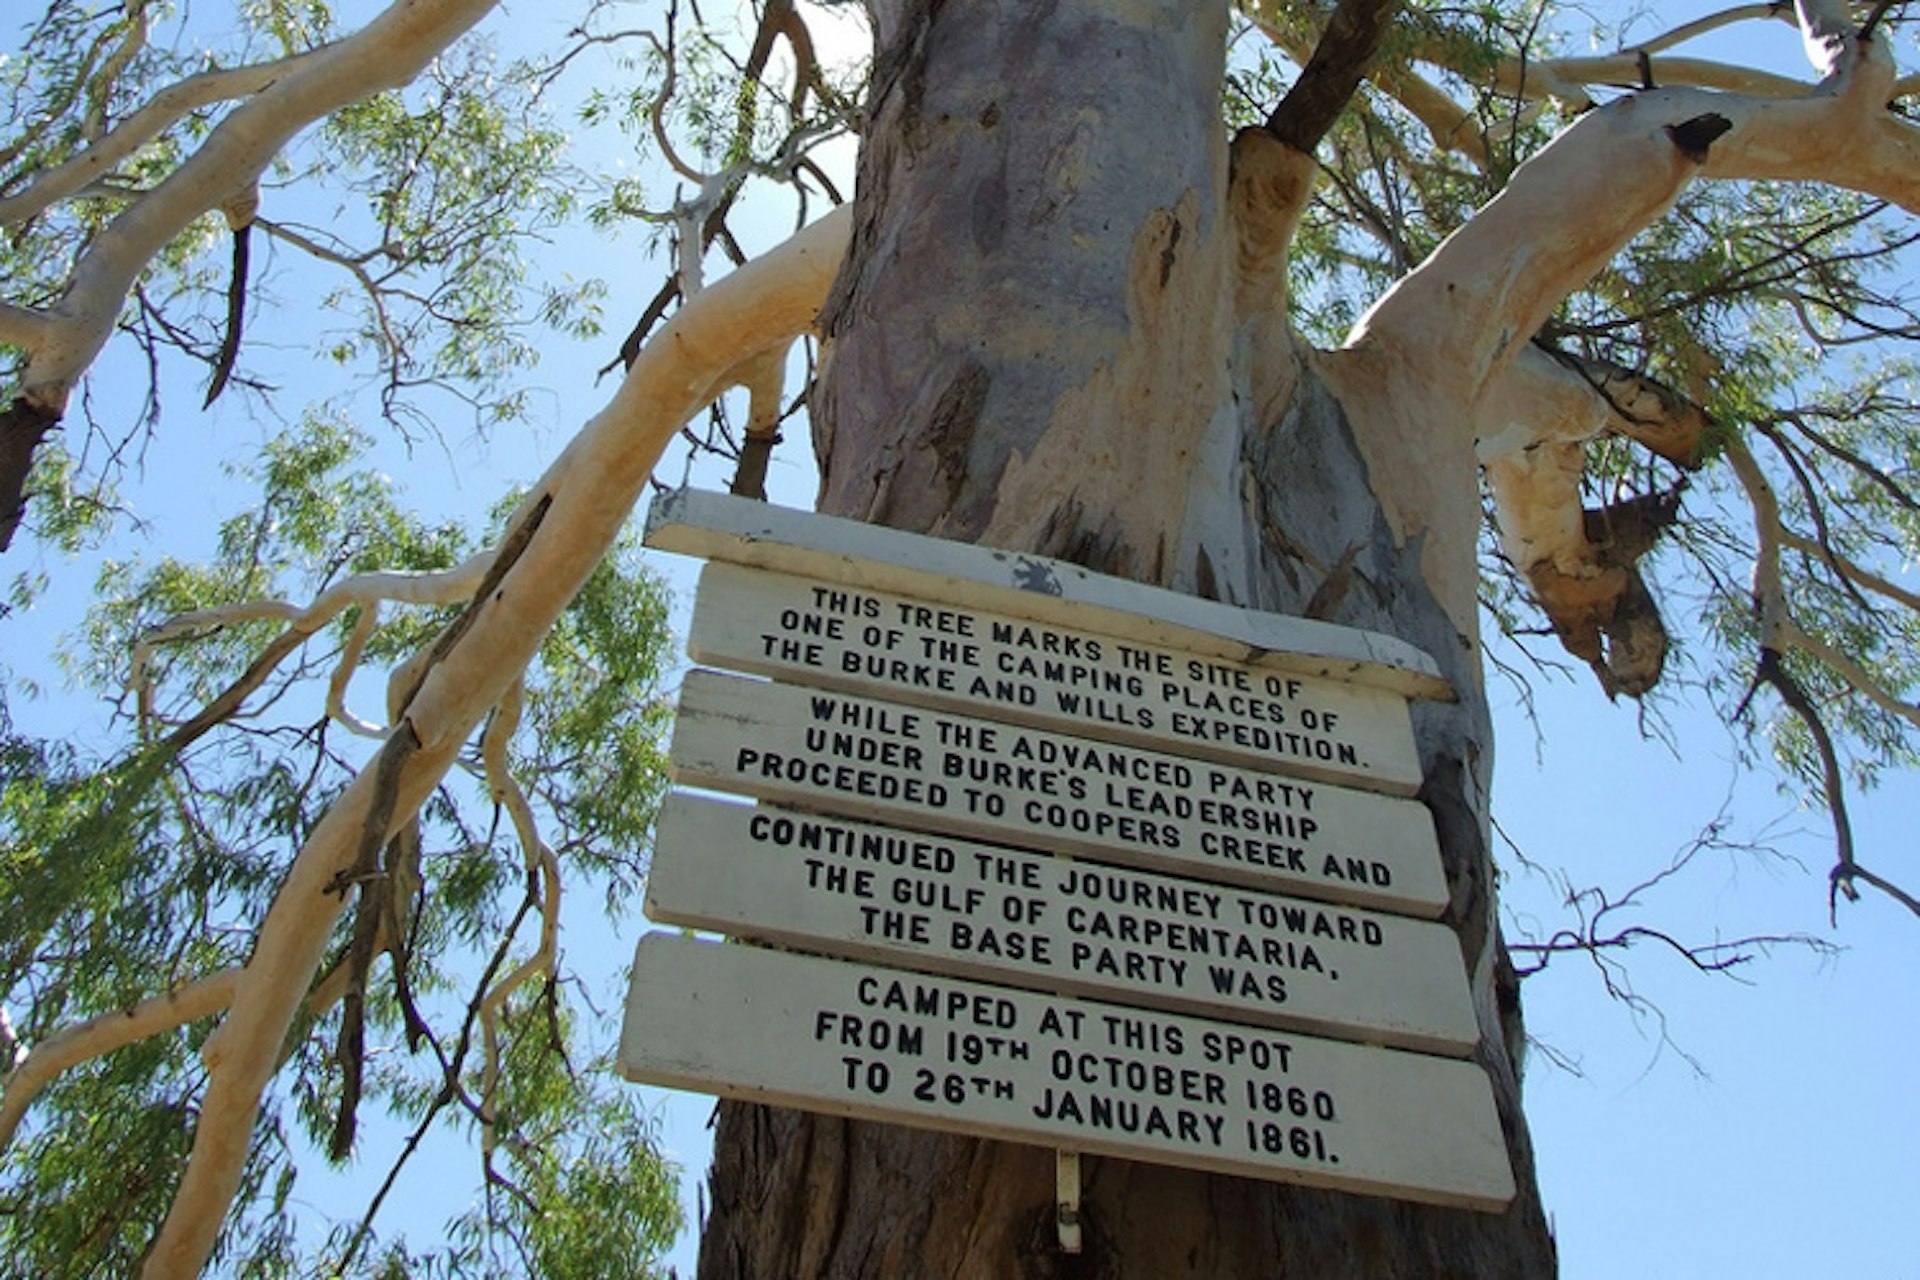 Spot where previous Australia explorers Burke and Wills camped. Image by Tamsin Slater / CC BY-SA 2.0